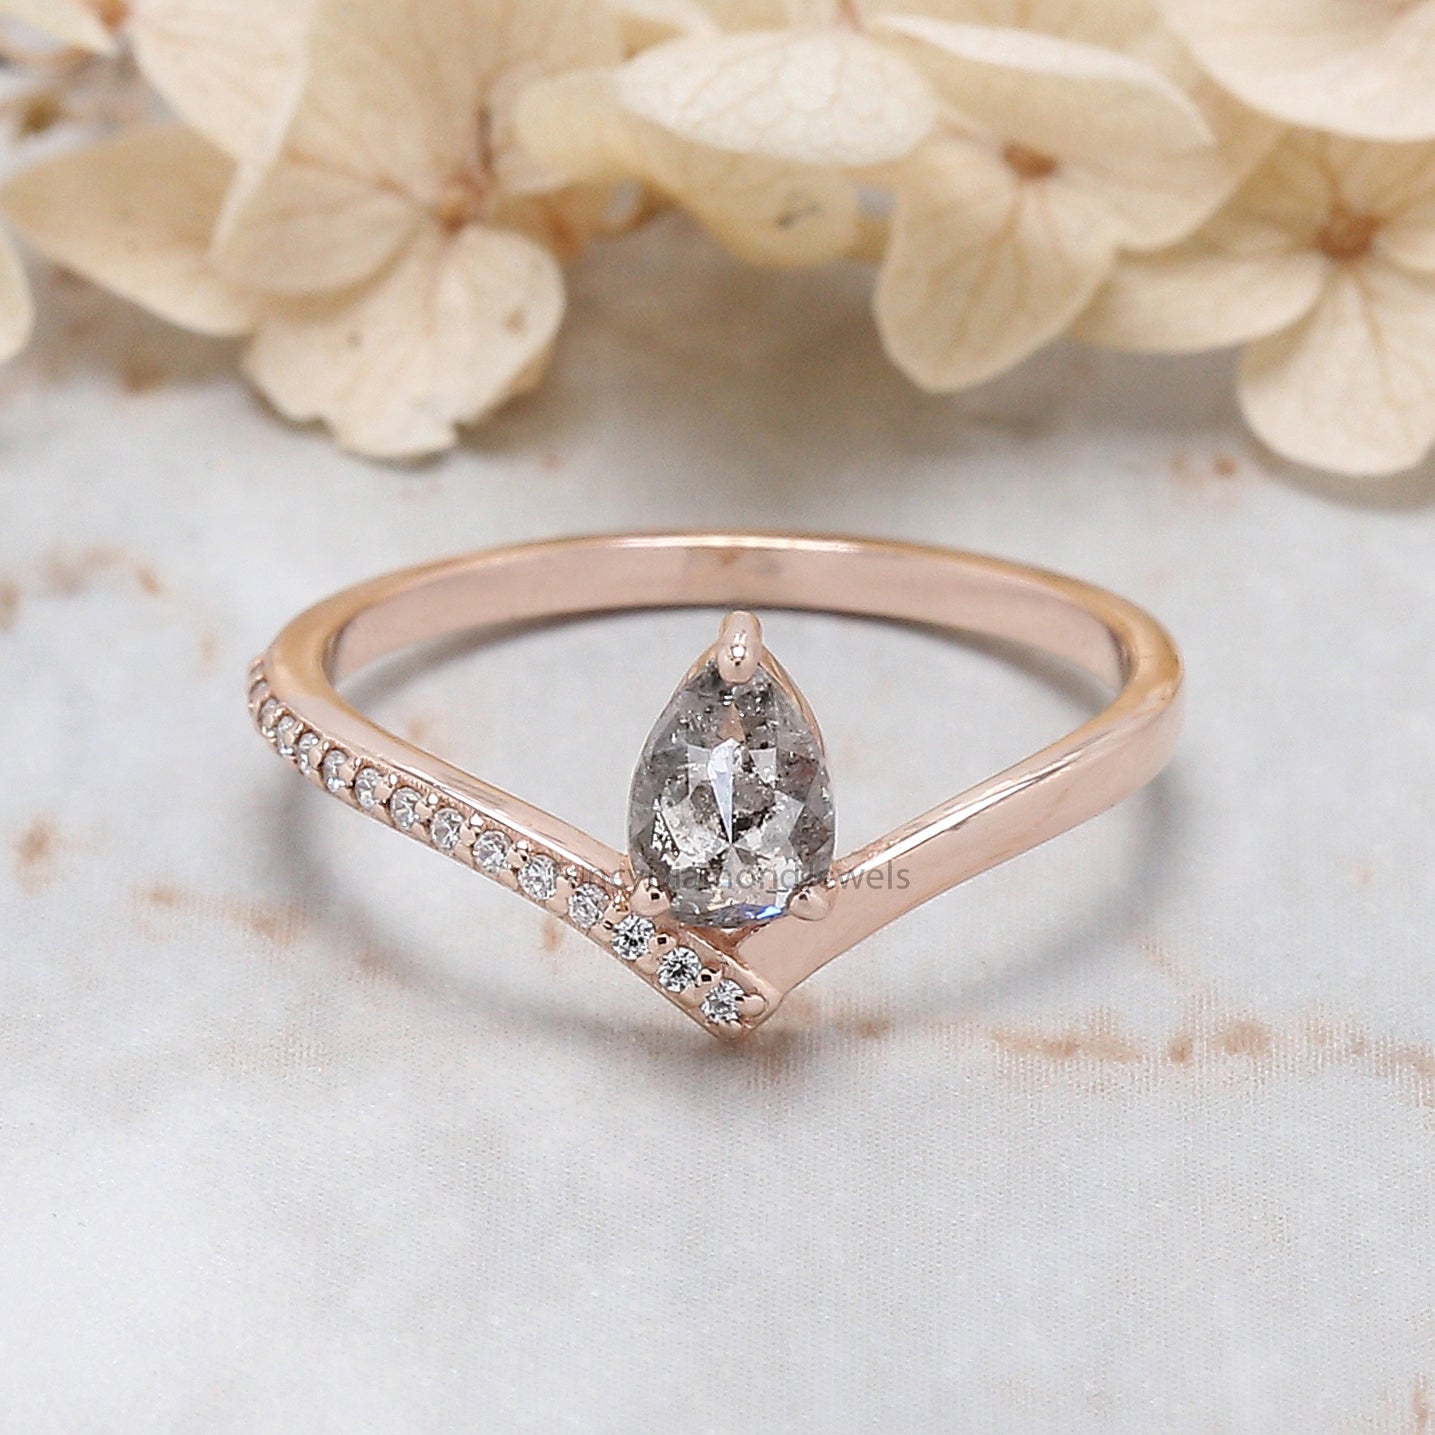 Pear Cut Salt And Pepper Diamond Ring 0.39 Ct 5.95 MM Pear Diamond Ring 14K Solid Rose Gold Silver Pear Engagement Ring Gift For Her QN606